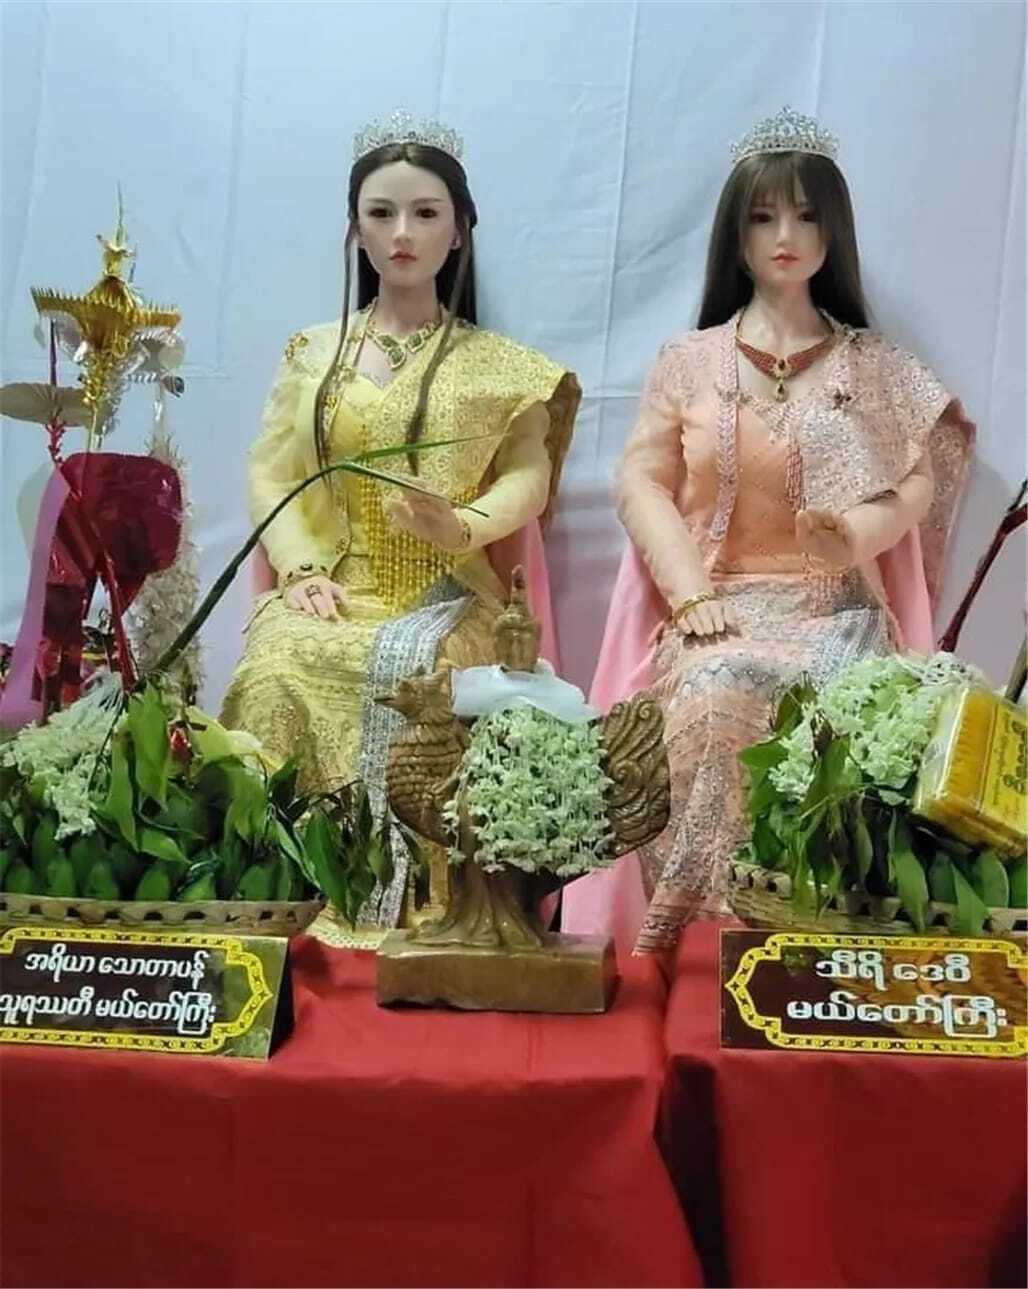 realistic-sex-dolls-brought-into-buddhist-temples-as-buddha